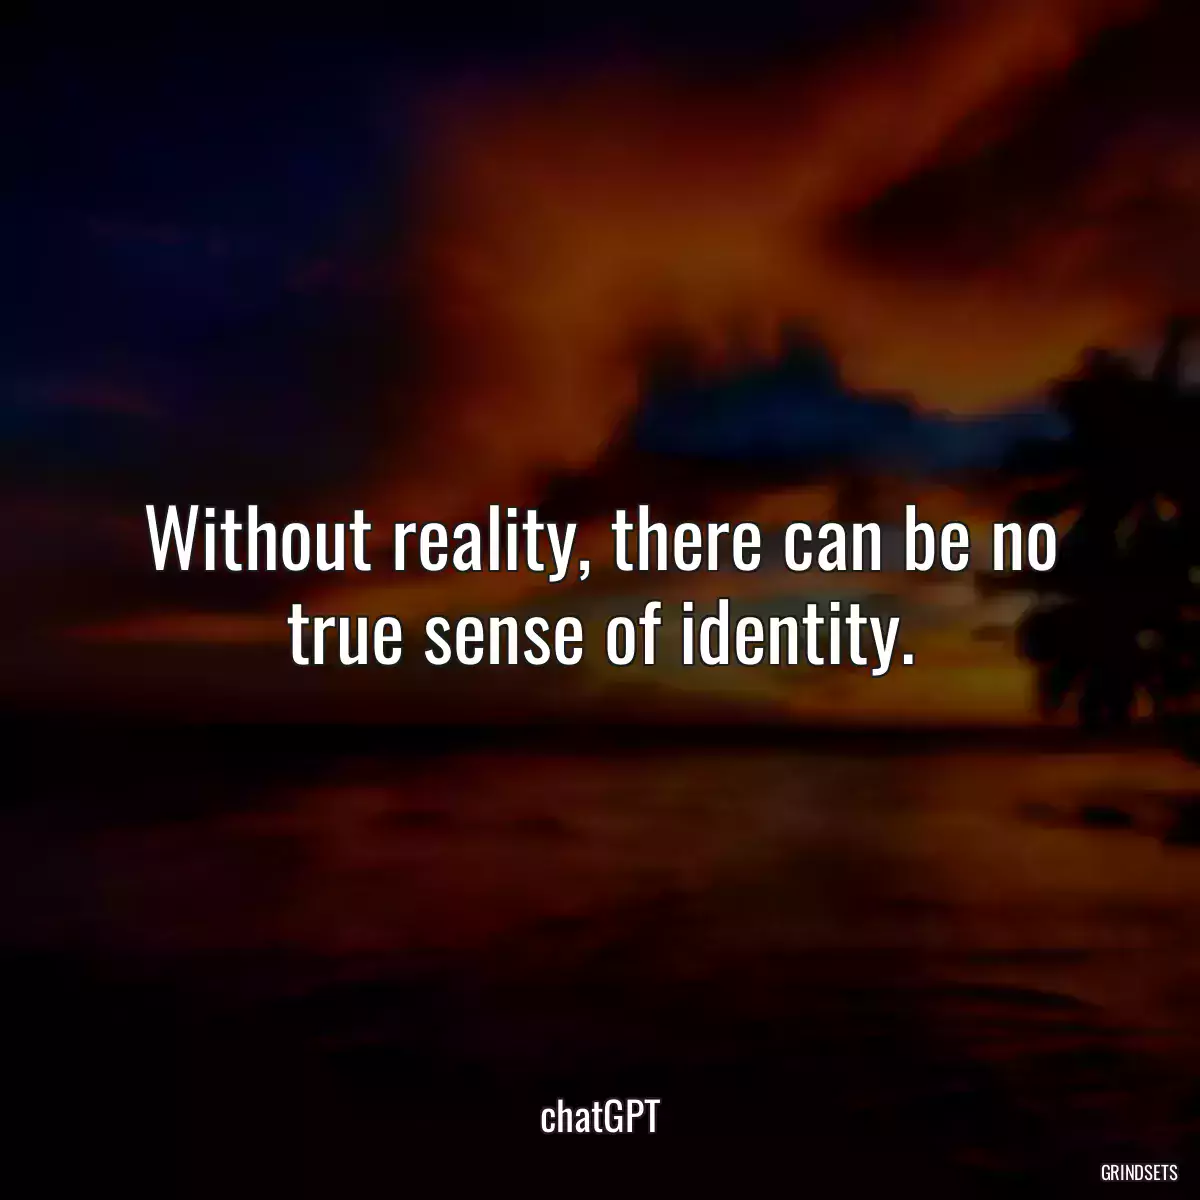 Without reality, there can be no true sense of identity.